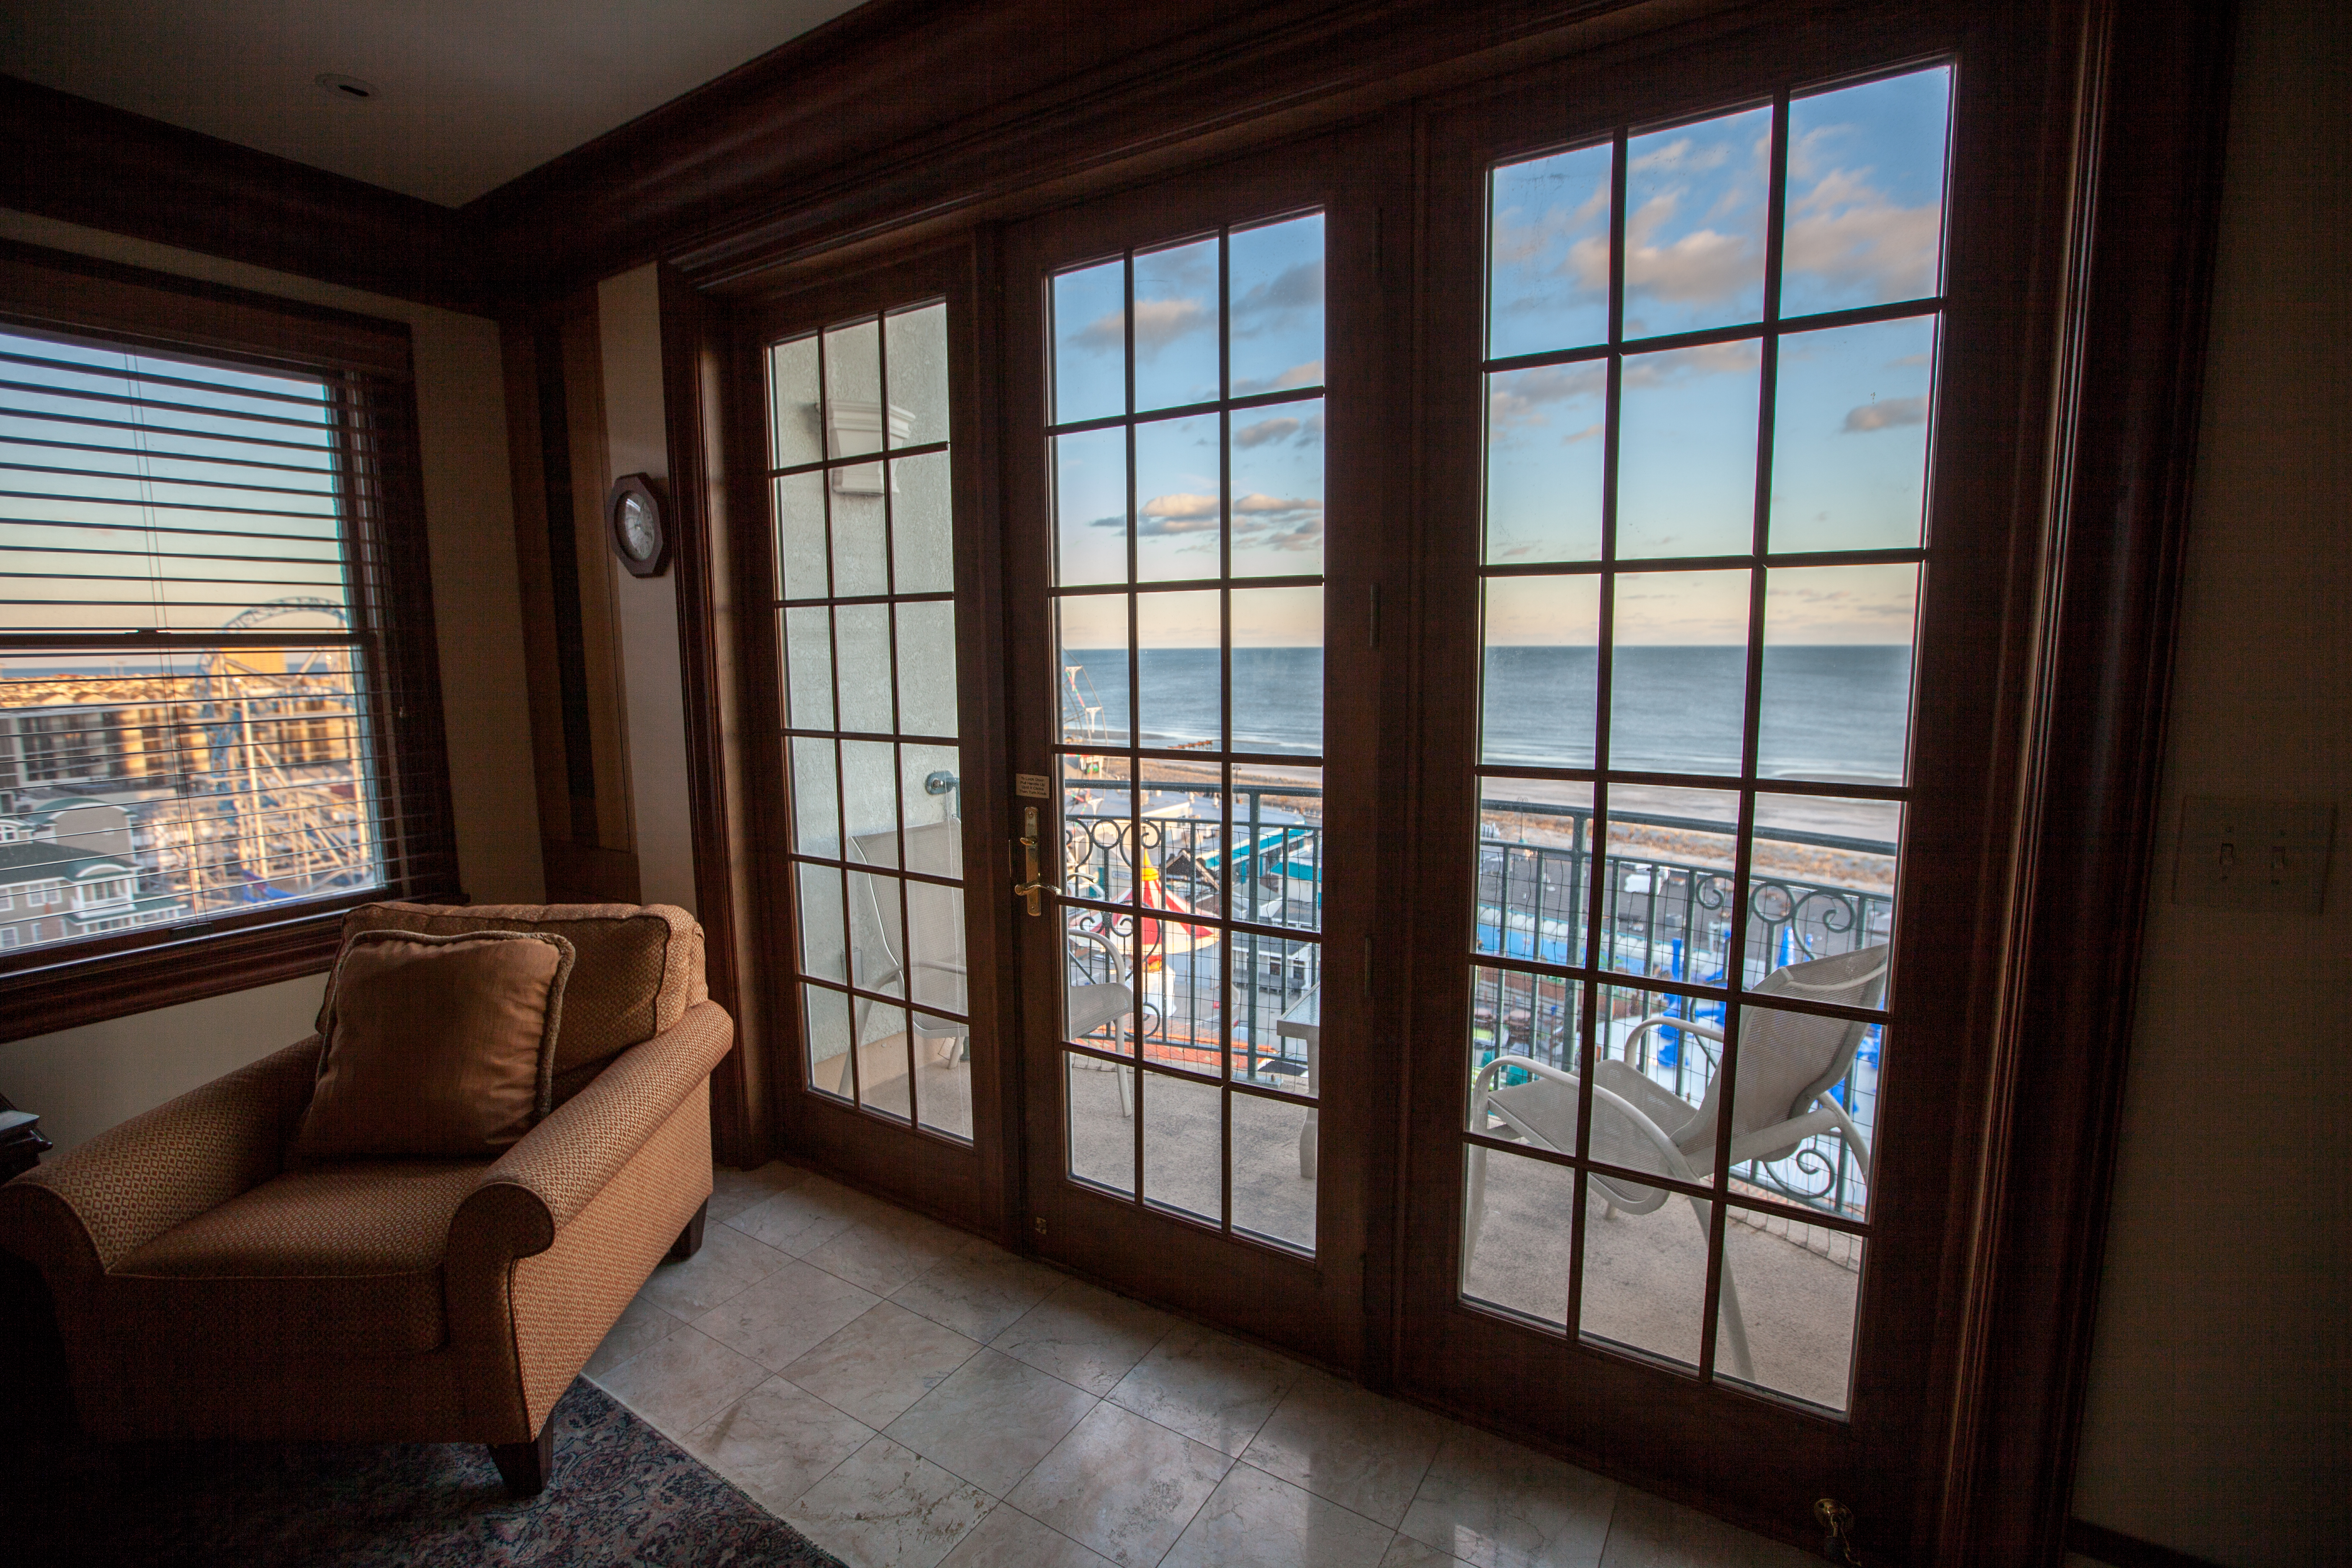 Penthouse view of the ocean from inside